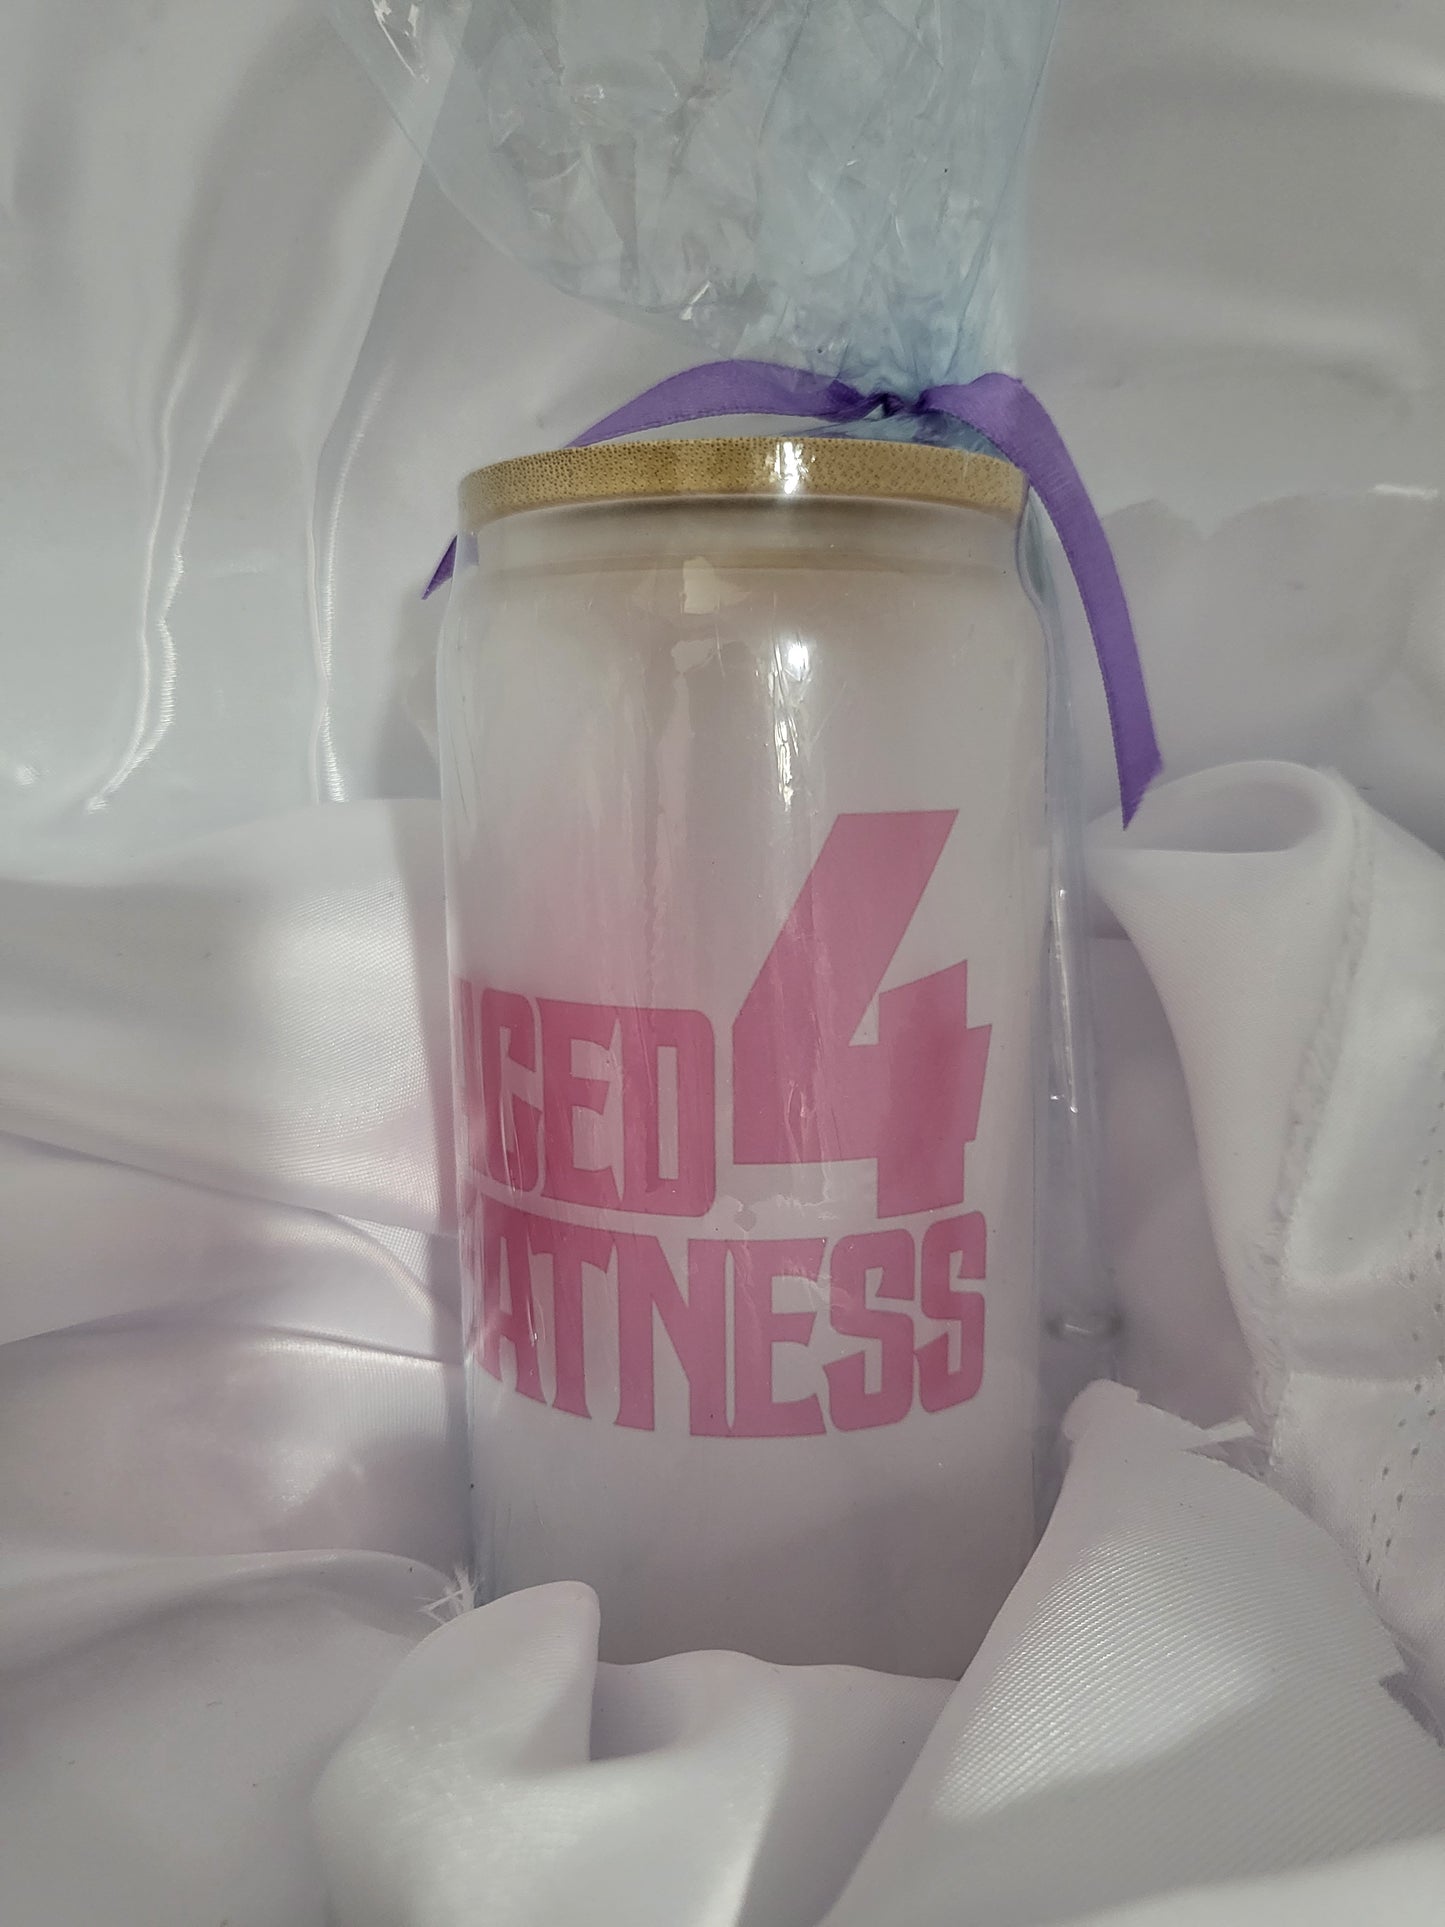 16 oz Frosted Glass Tumbler